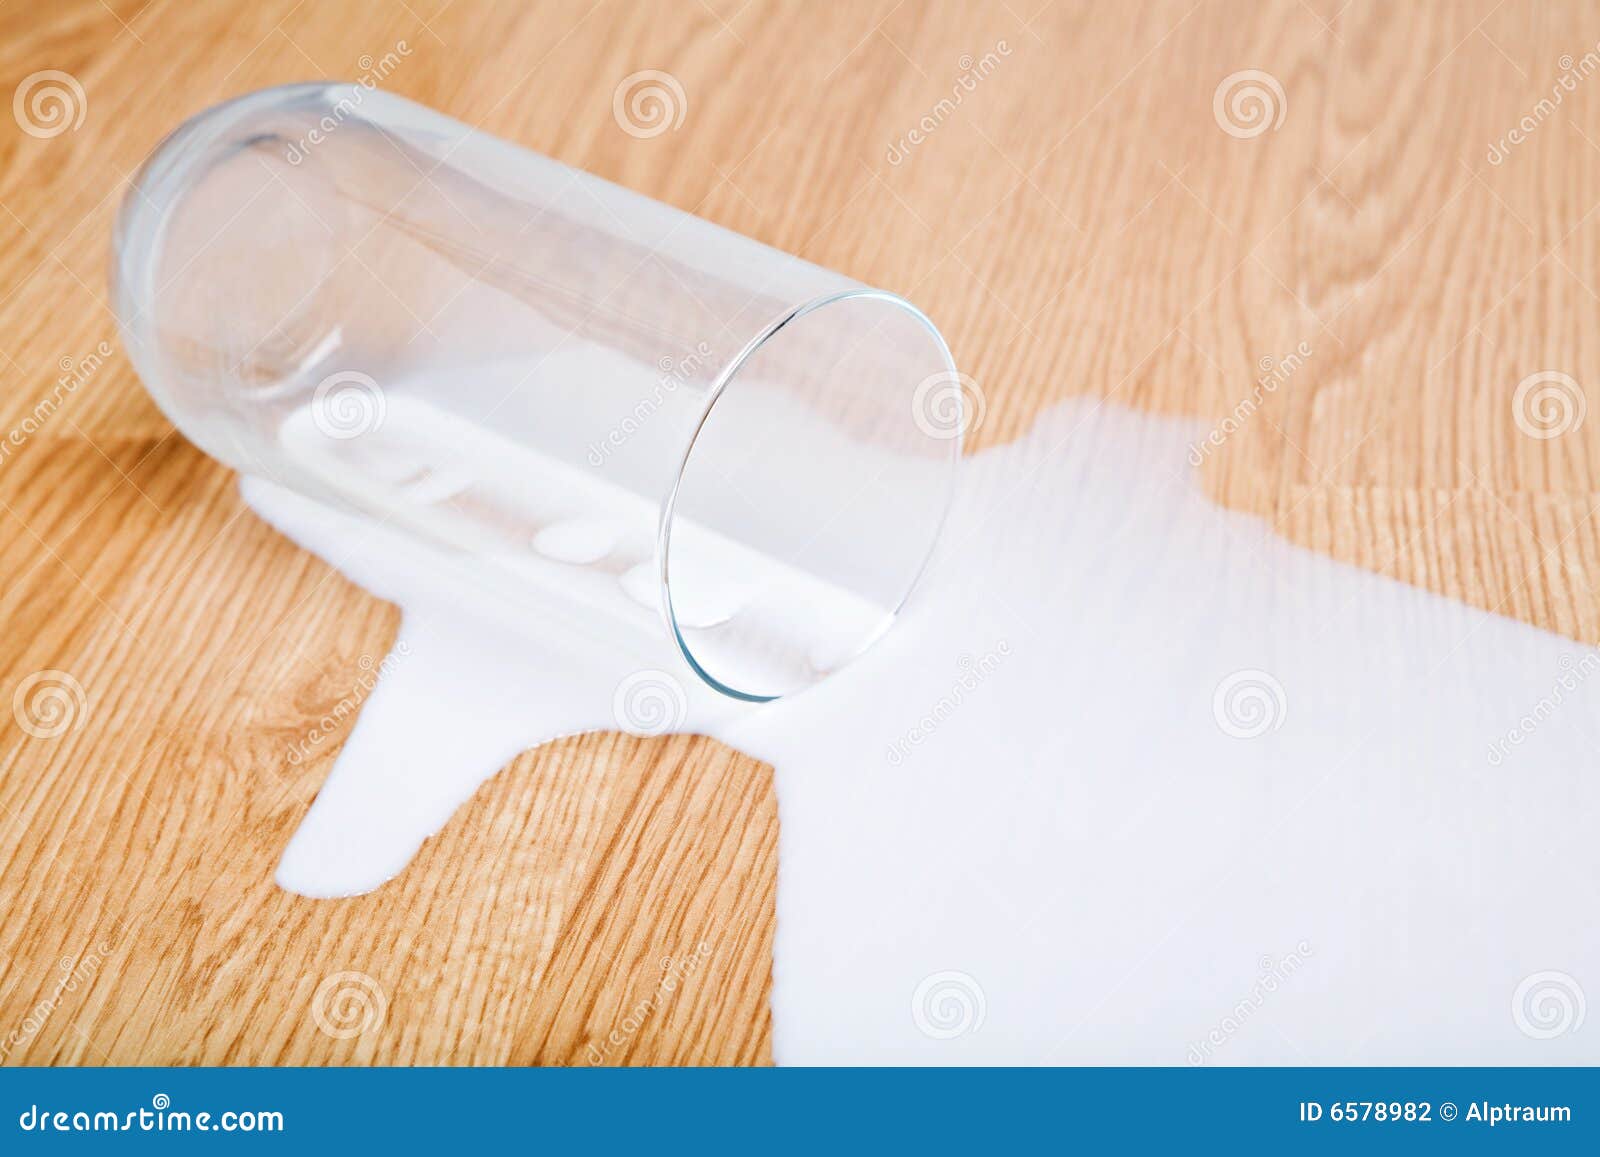 milk spilled from glass